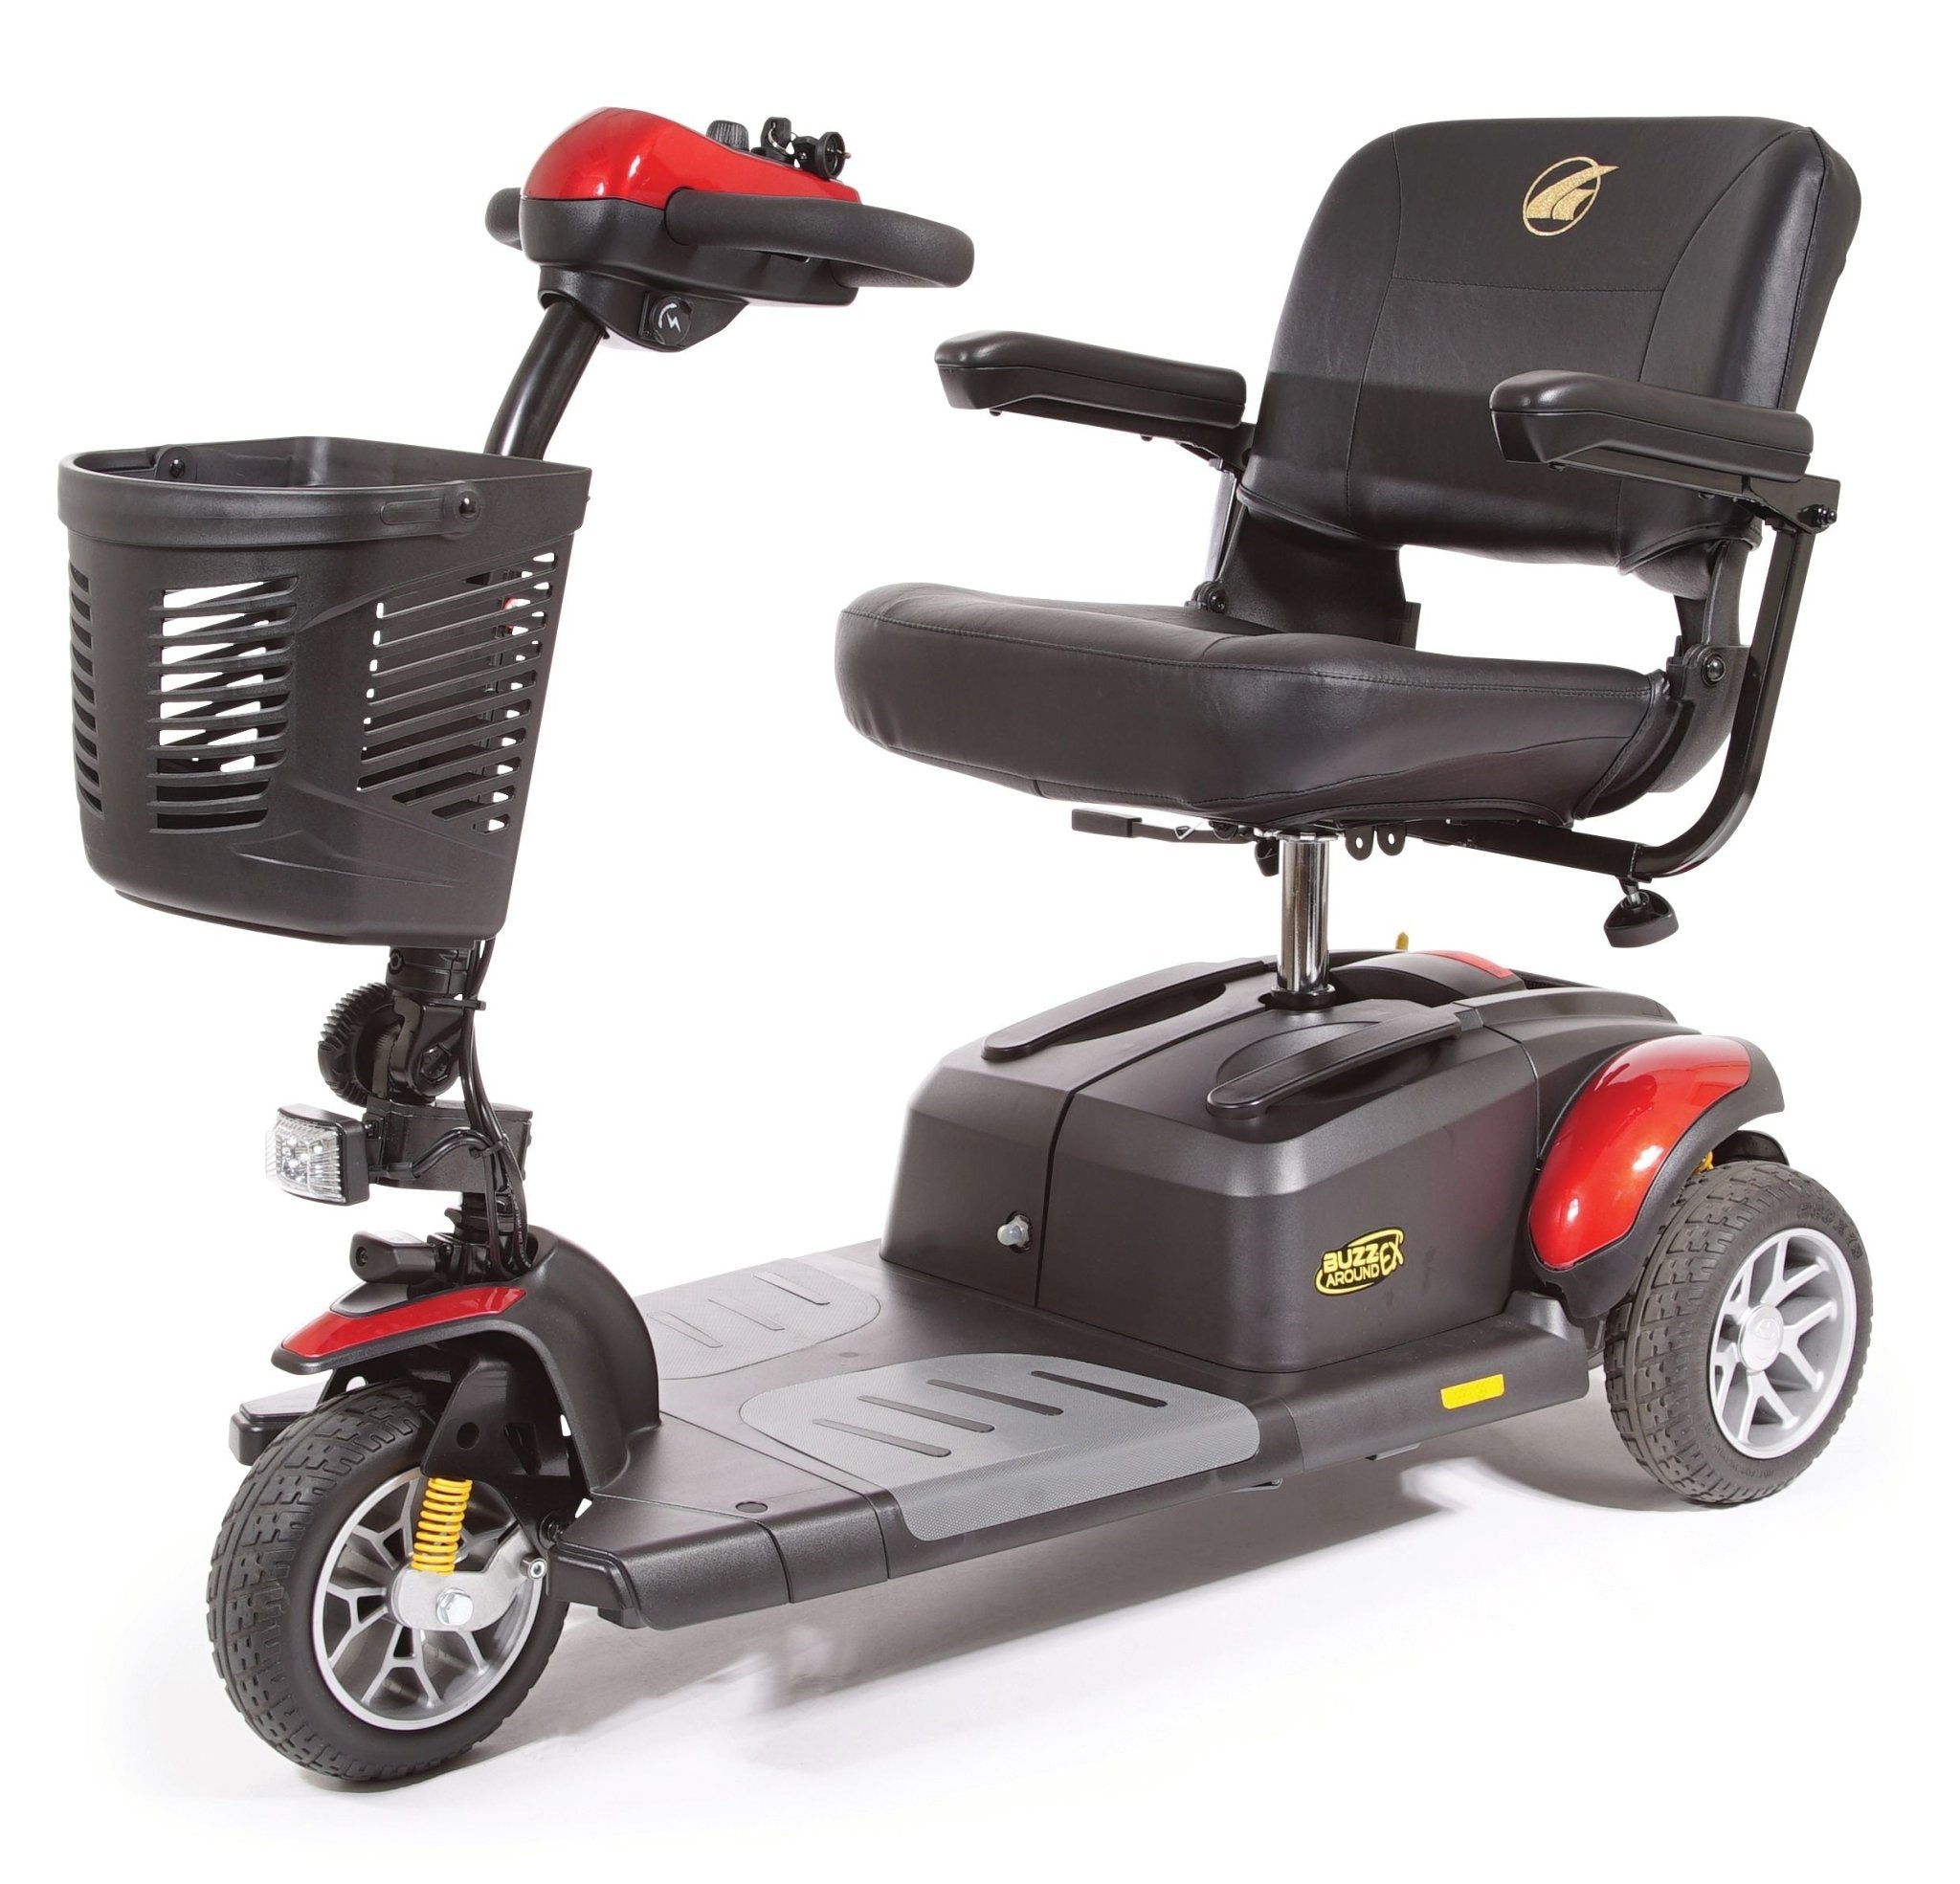 Buzzaround EX 3-Wheel Mobility Scooter Model GB118D - Midwest DME Supply